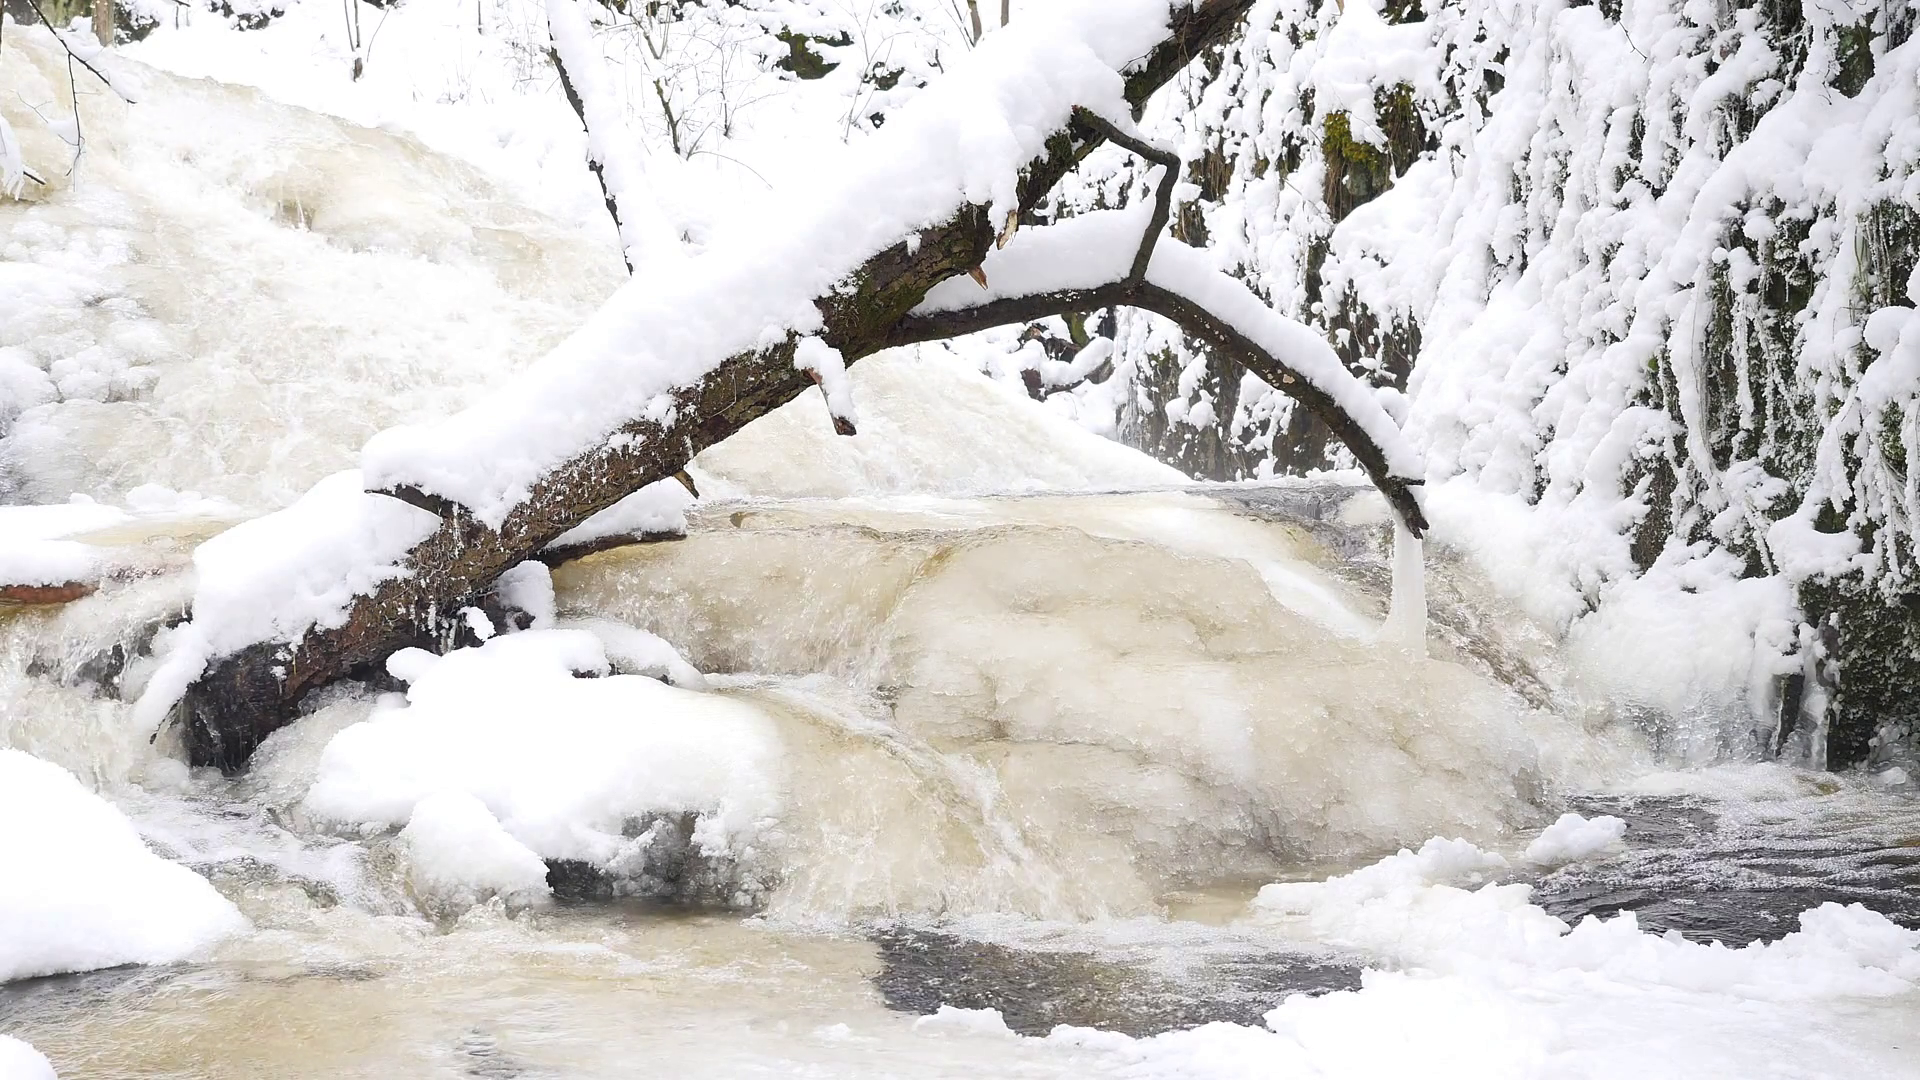 Frozen mountain stream. Snowy and icy stones in chilly water. Icicle ...